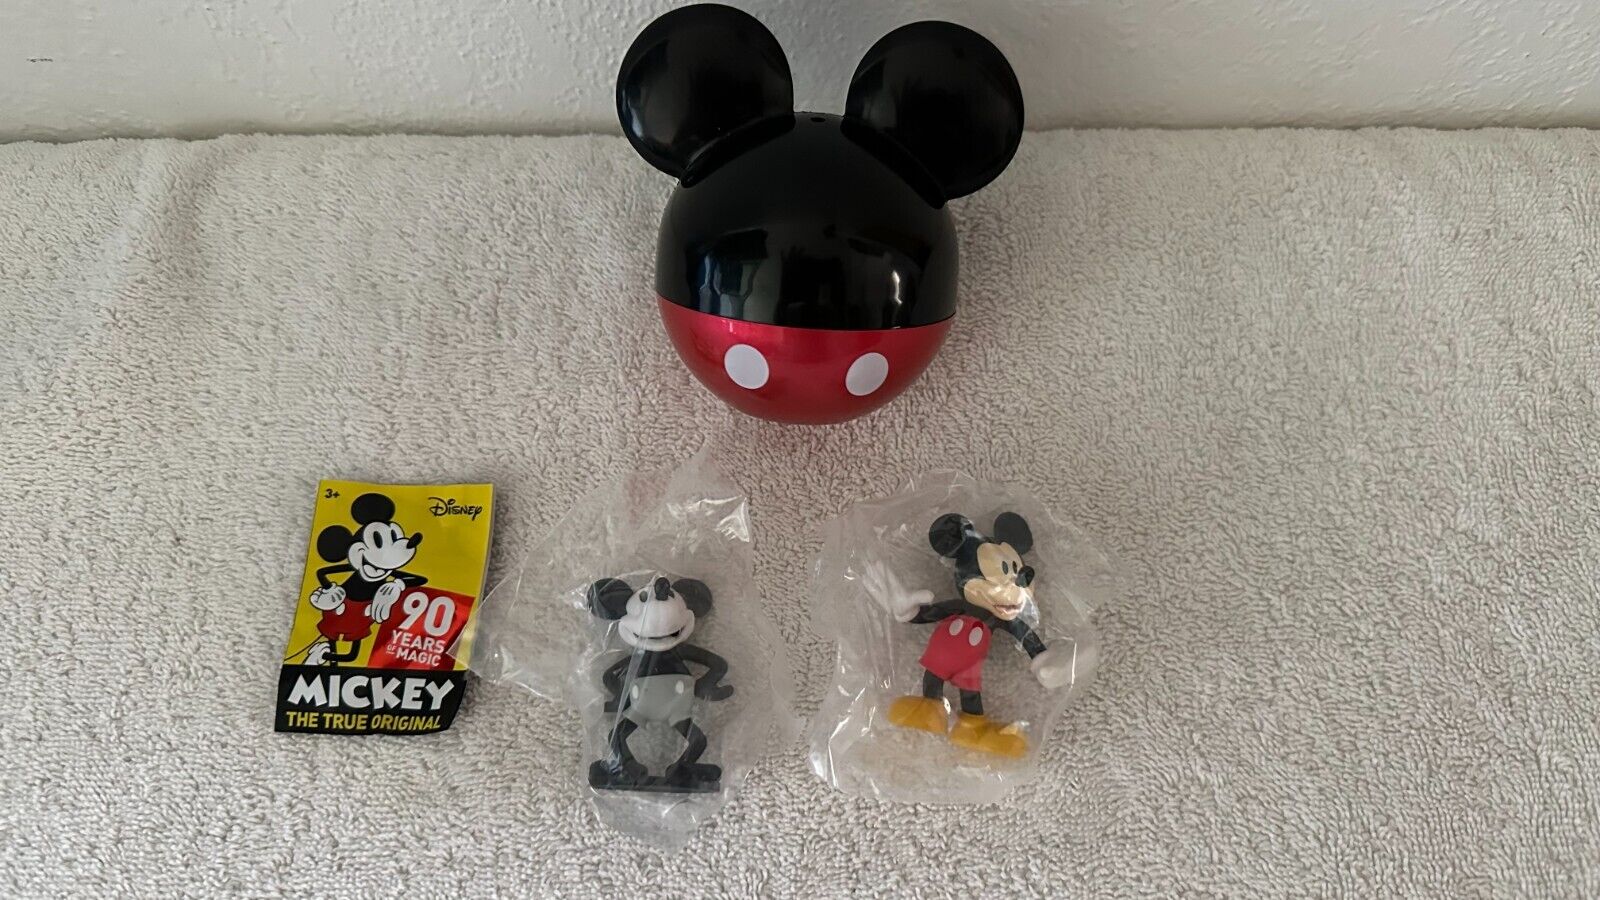 DISNEY MICKEY THE TRUE ORIGINAL 90 YEARS OF MAGIC MICKEY MOUSE FIGURES